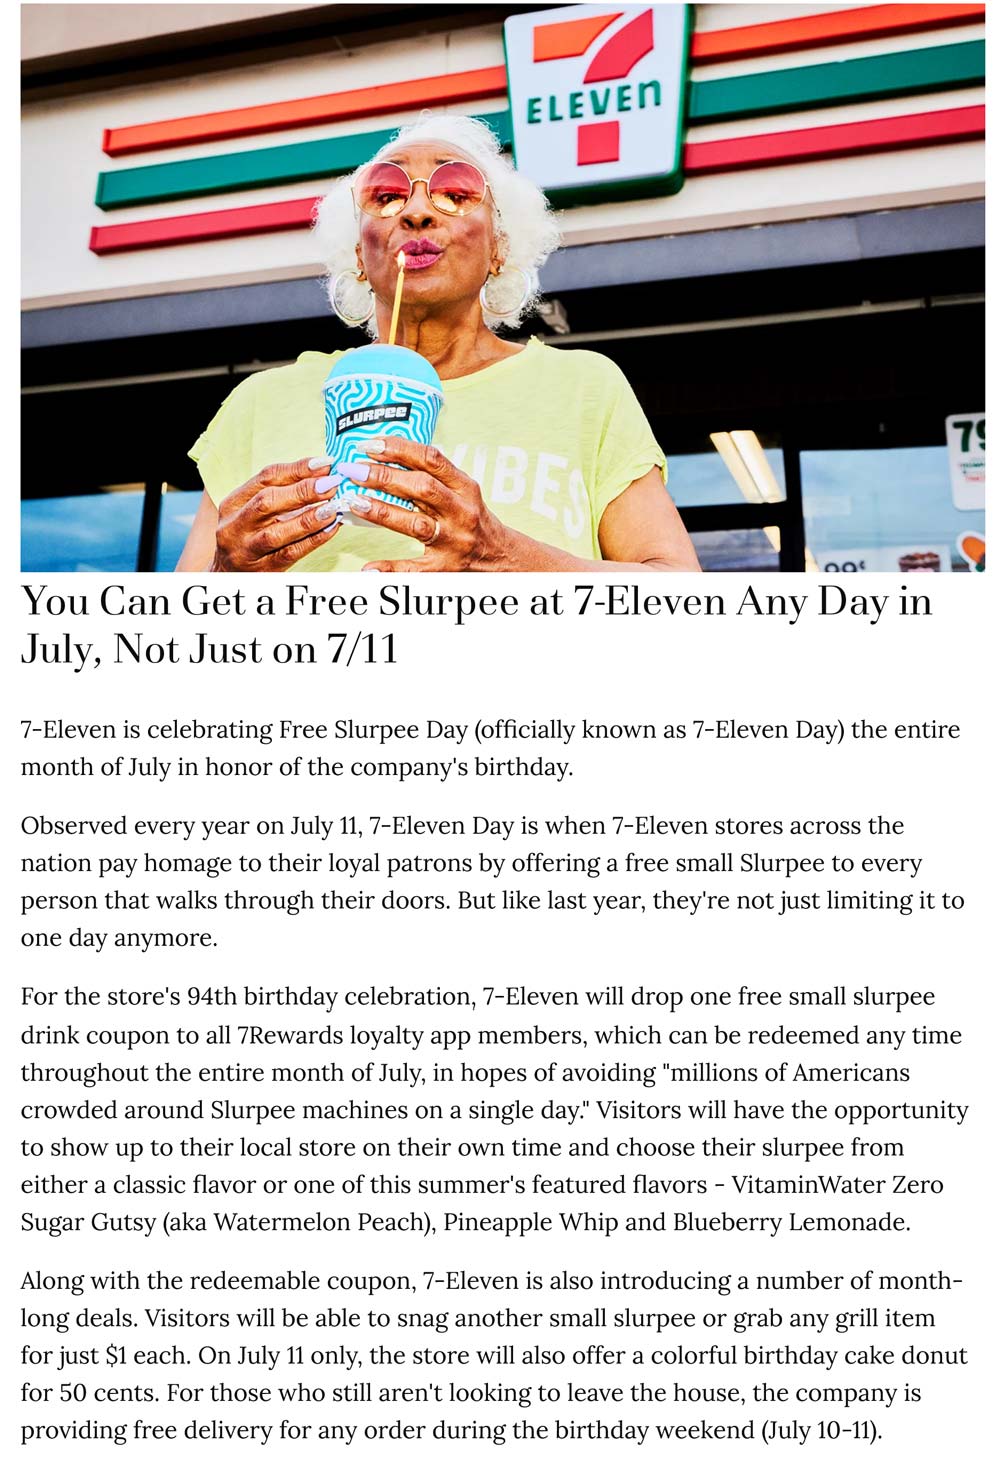 7-Eleven stores Coupon  1 free slurpee for rewards members in July at 7-Eleven #7eleven 